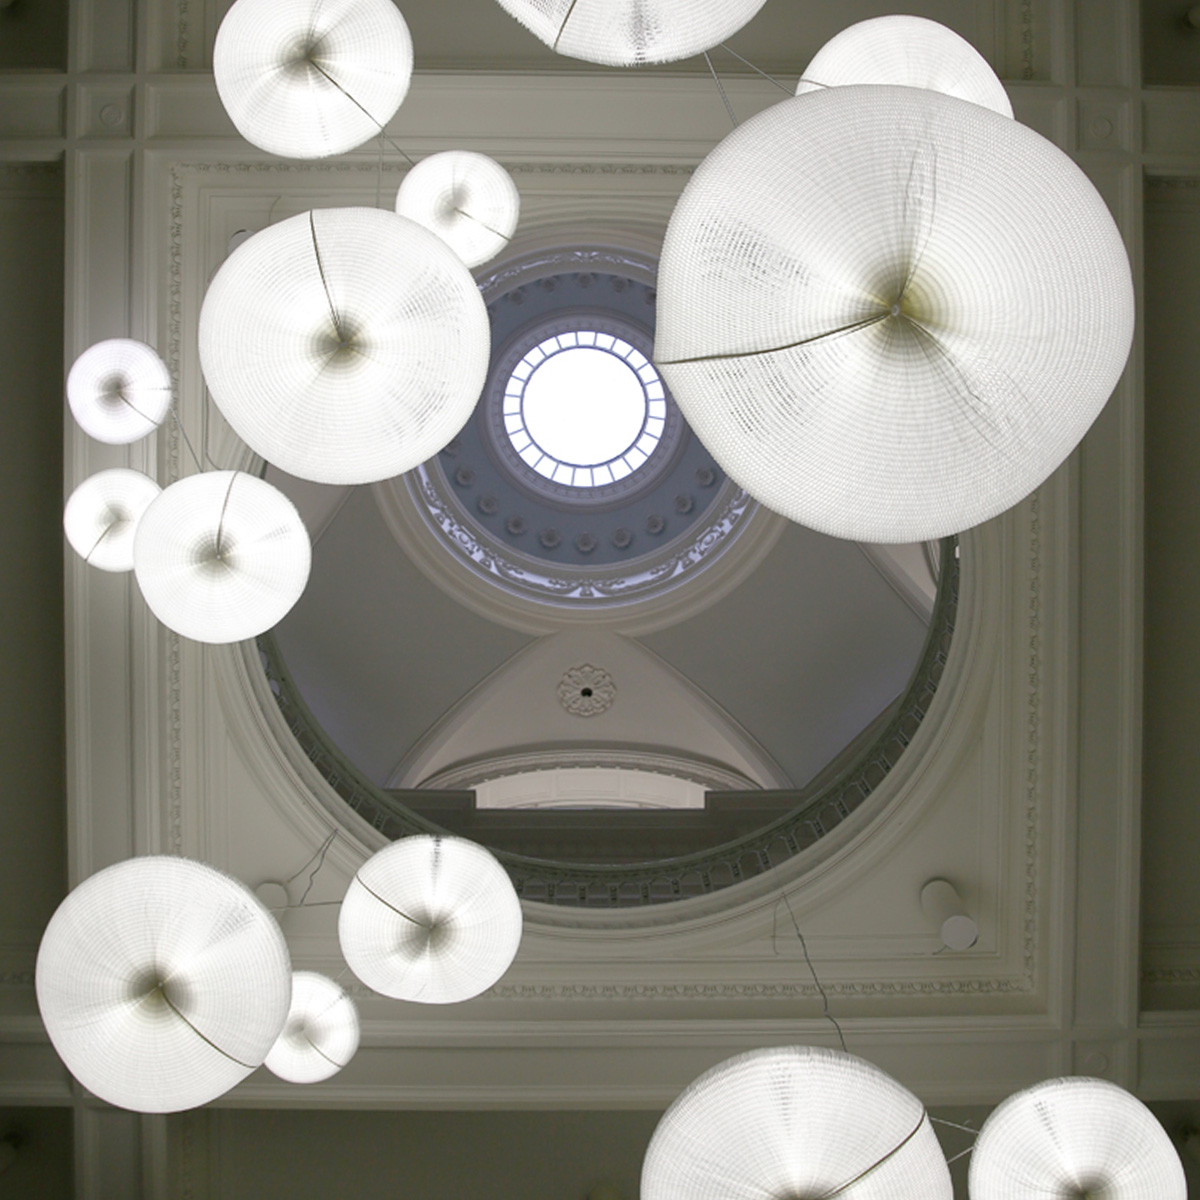 molo makes a custom installation of cloud softlight mobiles for the exhibition Grand Hotel at the Vancouver Art Gallery